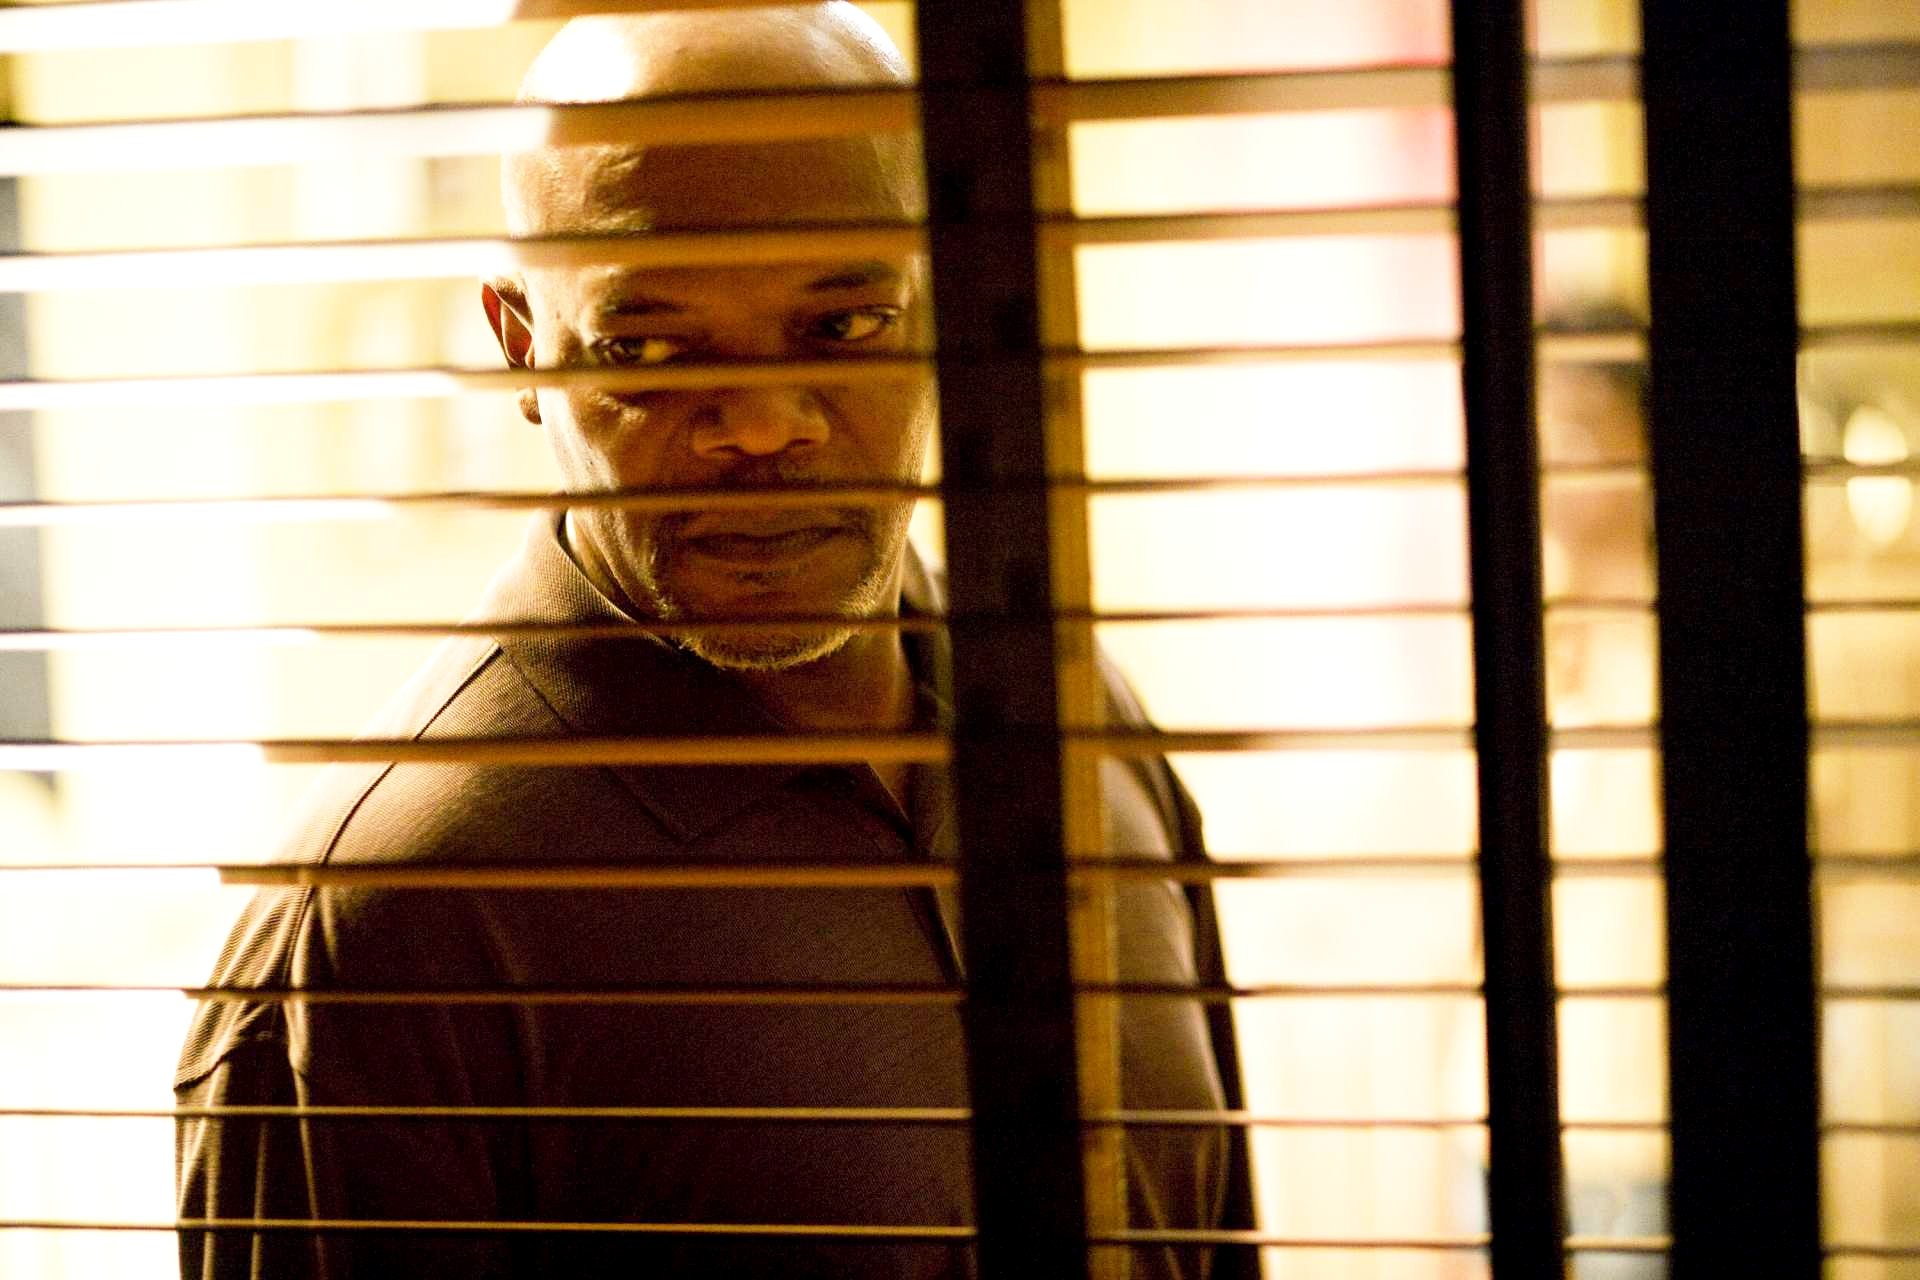 Samuel L. Jackson stars as Abel Turner in Screen Gems' Lakeview Terrace (2008). Photo credit by Chuck Zlotnick.